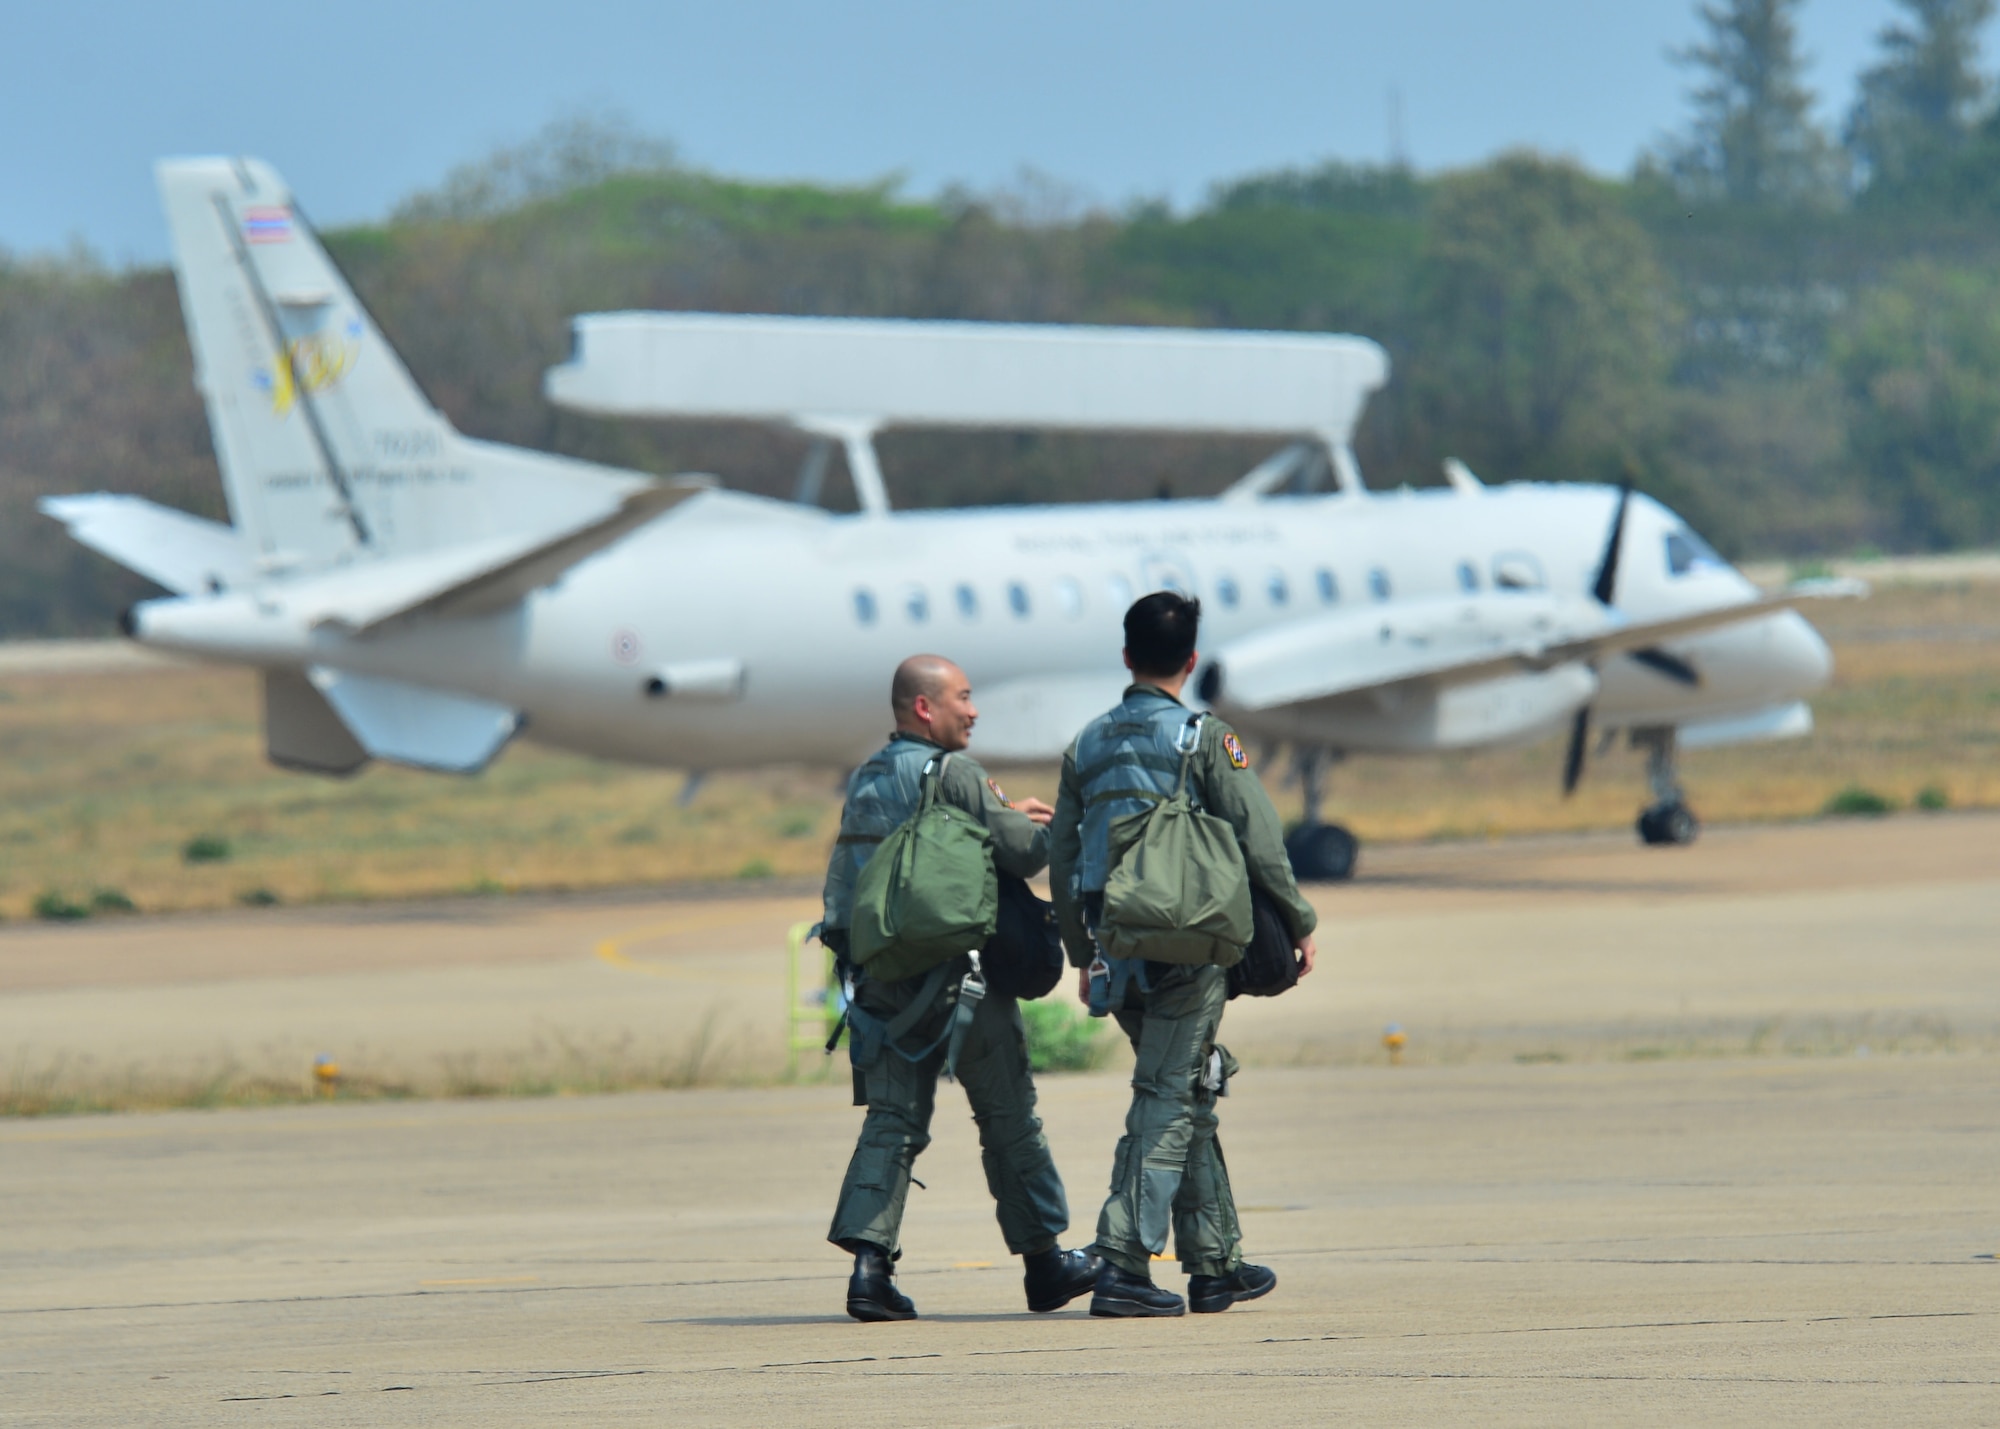 Two Republic of Singapore Air Force pilots walk and talk as a Royal Thai Air Force SAAB 340 AEW taxies past during Exercise Cope Tiger 16, on Korat Royal Thai Air Force Base, Thailand, March 7, 2016. Exercise Cope Tiger 16 includes over 1,200 personnel from three countries and continues the growth of strong, interoperable and beneficial relationships within the Asia-Pacific Region, while demonstrating U.S. capability to project forces strategically in a combined, joint environment. (U.S. Air Force Photo by Tech Sgt. Aaron Oelrich/Released)